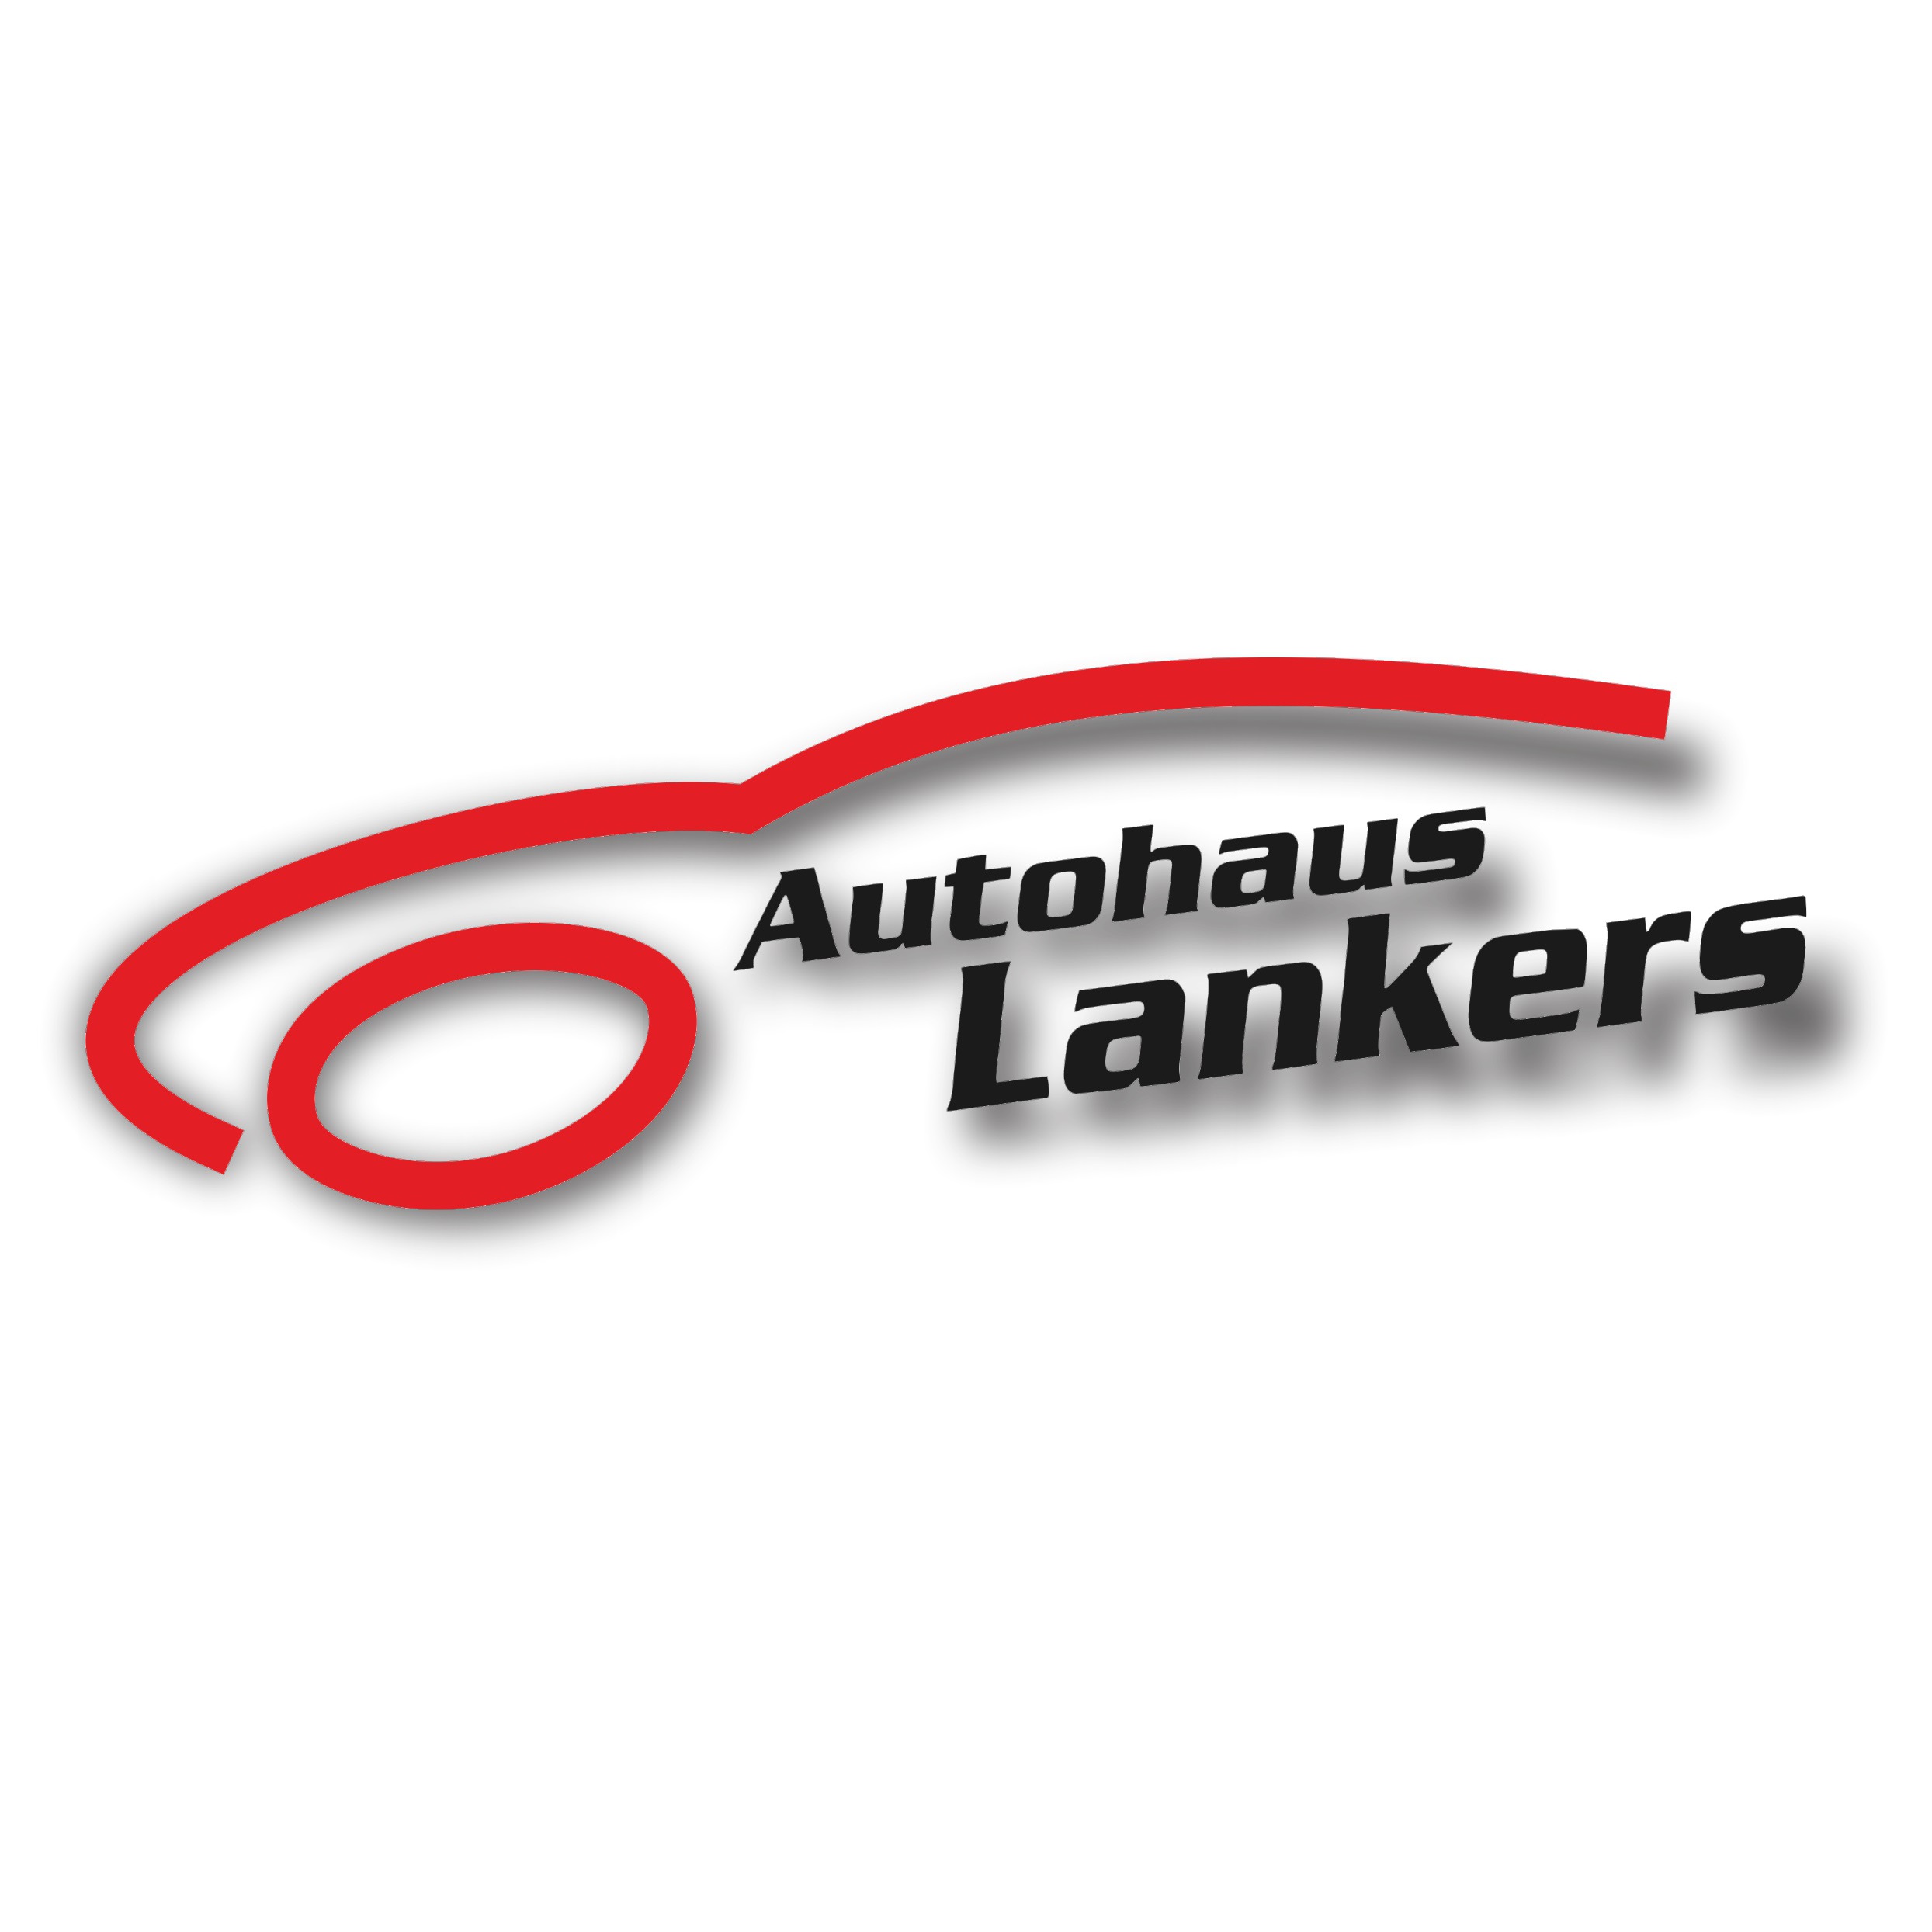 Autohaus Lankers Logo